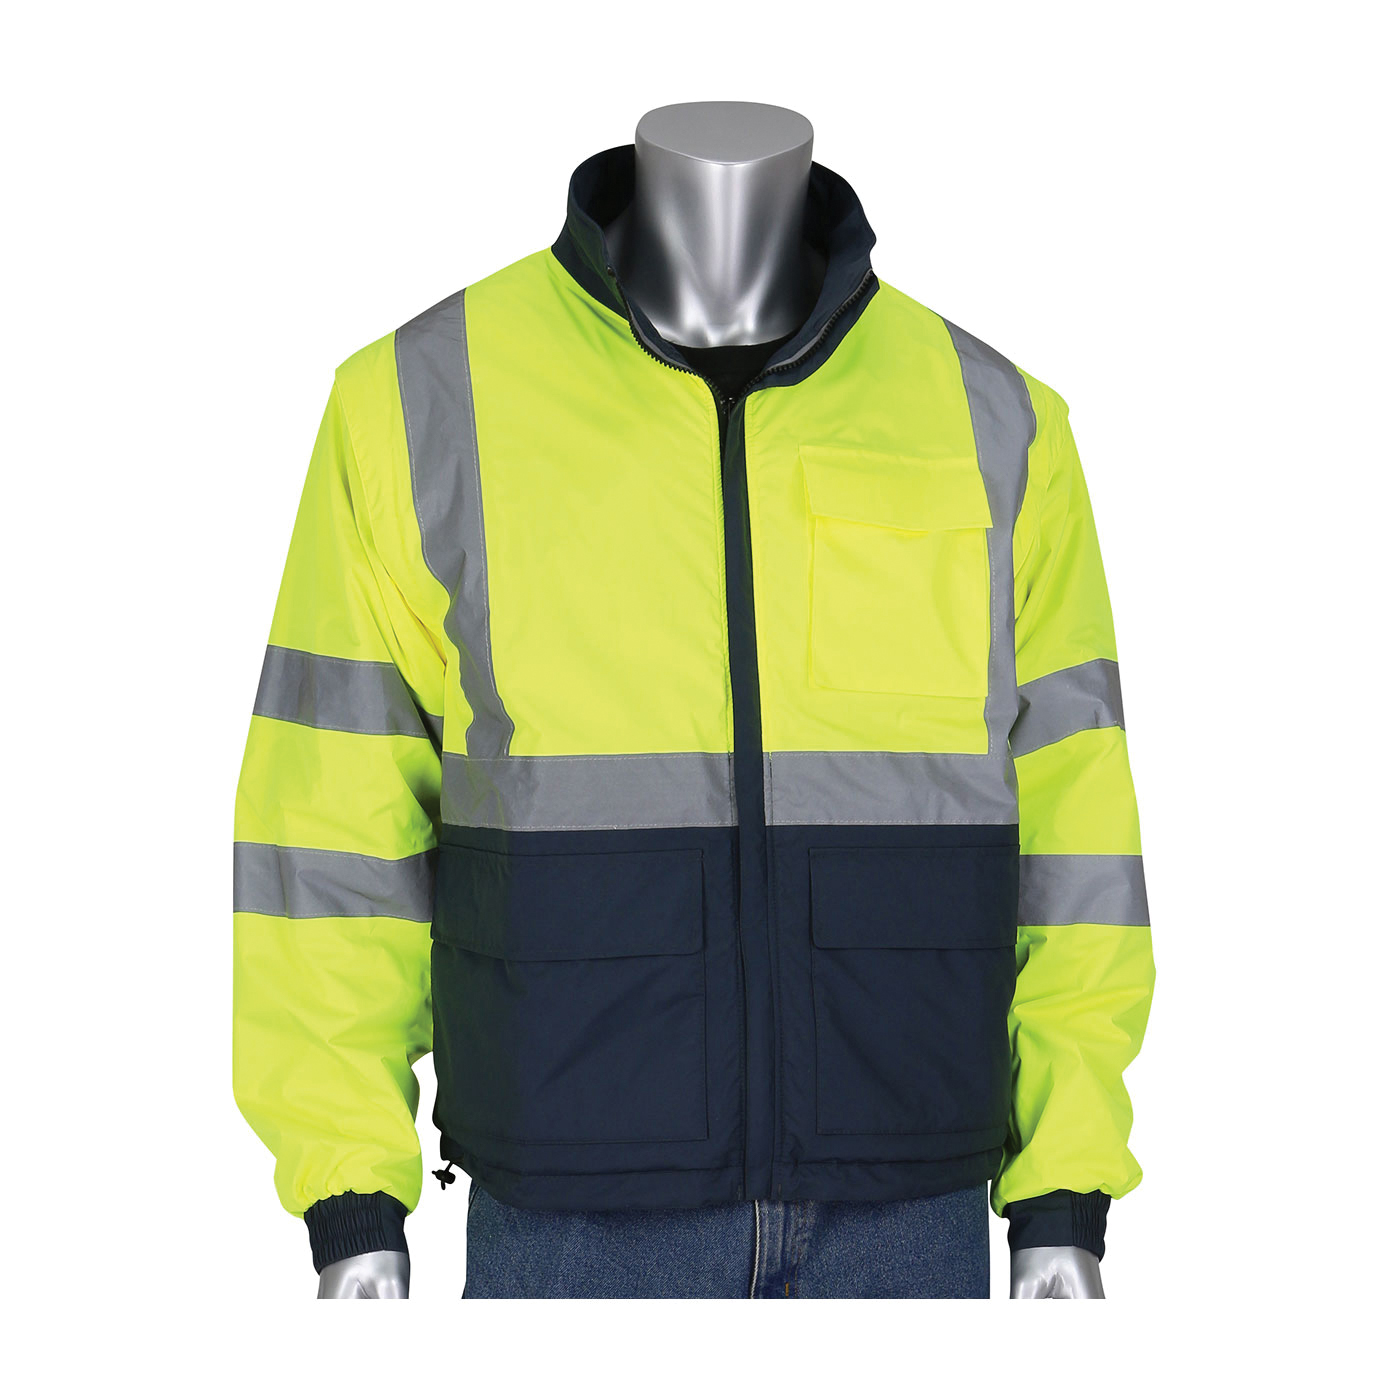 PIP® 333-1500-R/L 333-1500-R 4-in-1 Multi-Seasonal Lightweight Reversible Windbreaker Jacket With Detachable Sleeves, Dark Gray/Hi-Viz Lime Yellow, Polyester, 51.2 in Chest, Resists: Water, ANSI 107 Type R Class 3